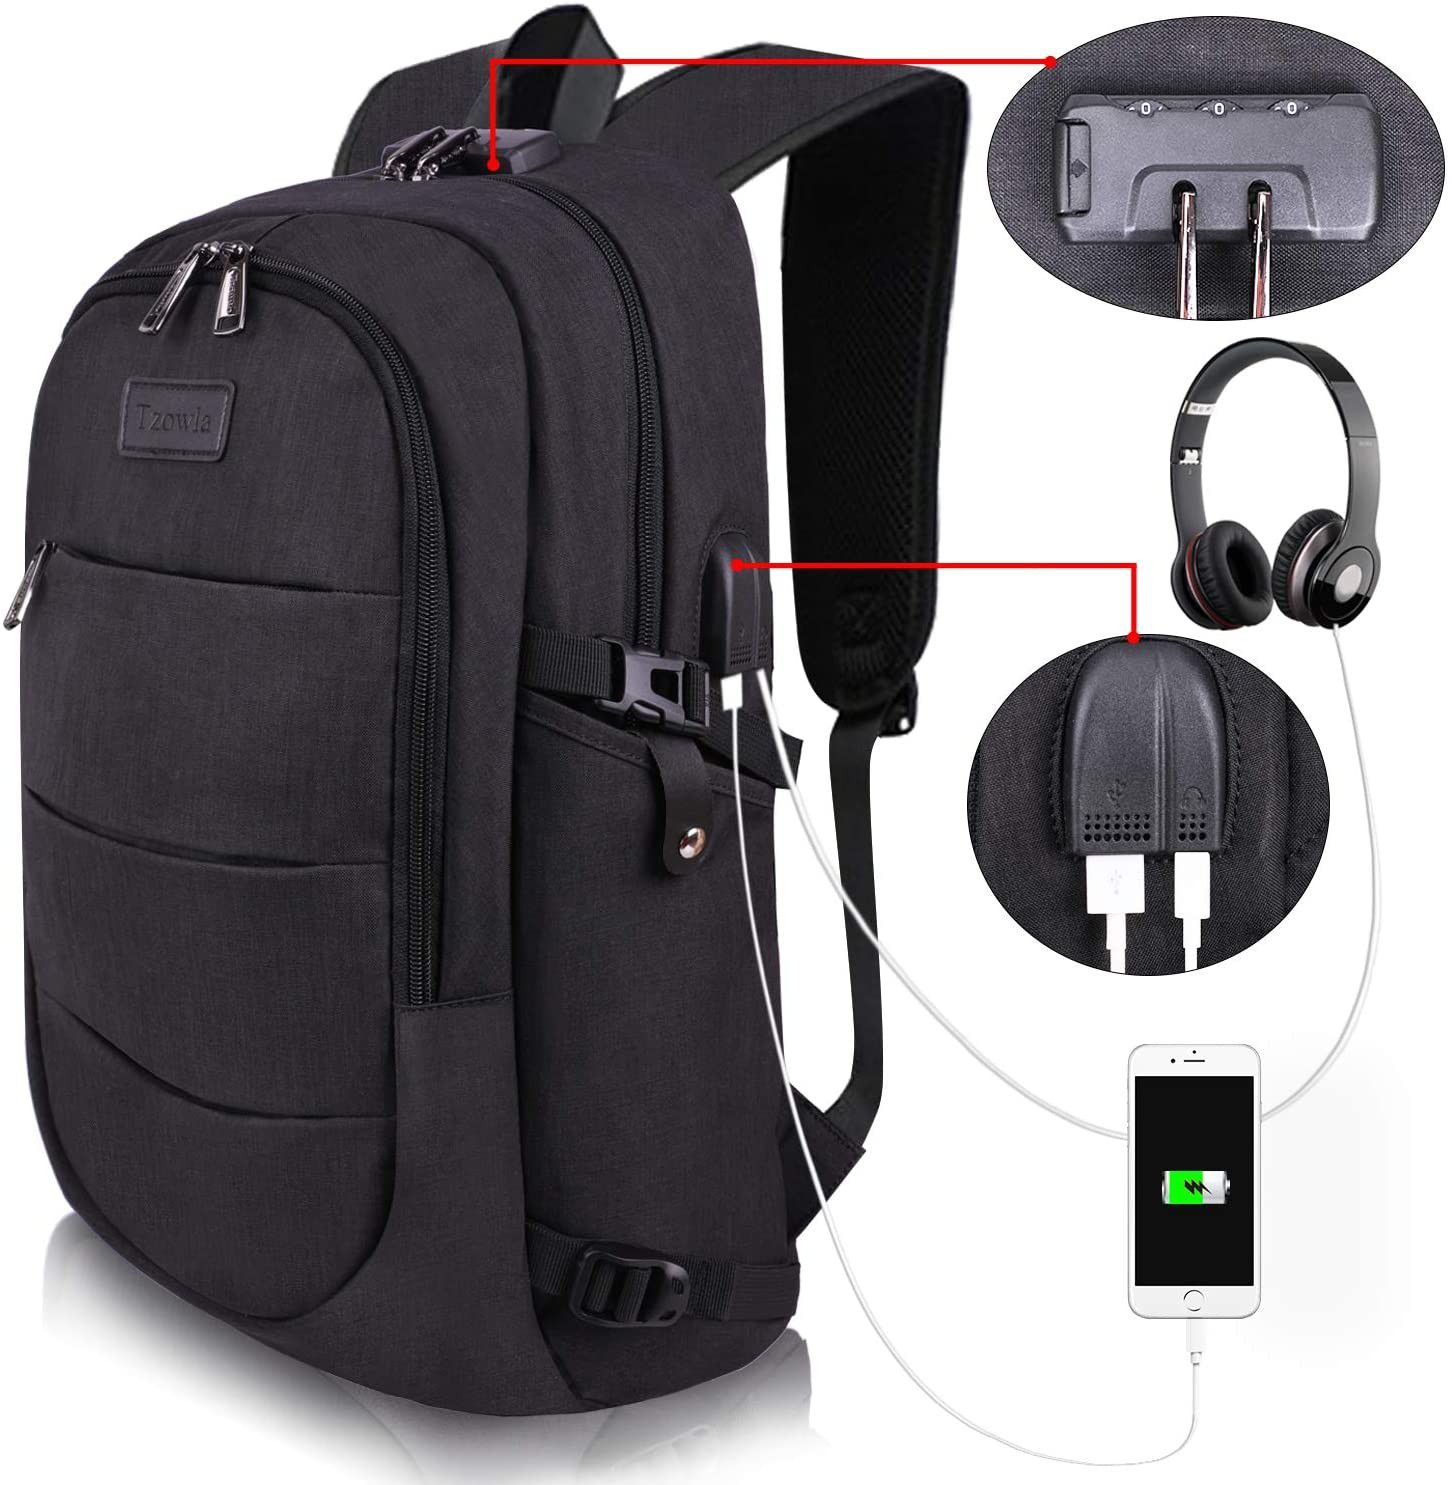 Backpack Water Resistant Anti-Theft College Bag with USB Charging Port & Lock Unisex Black Business Computer Hiking Luggage Bag Brand New